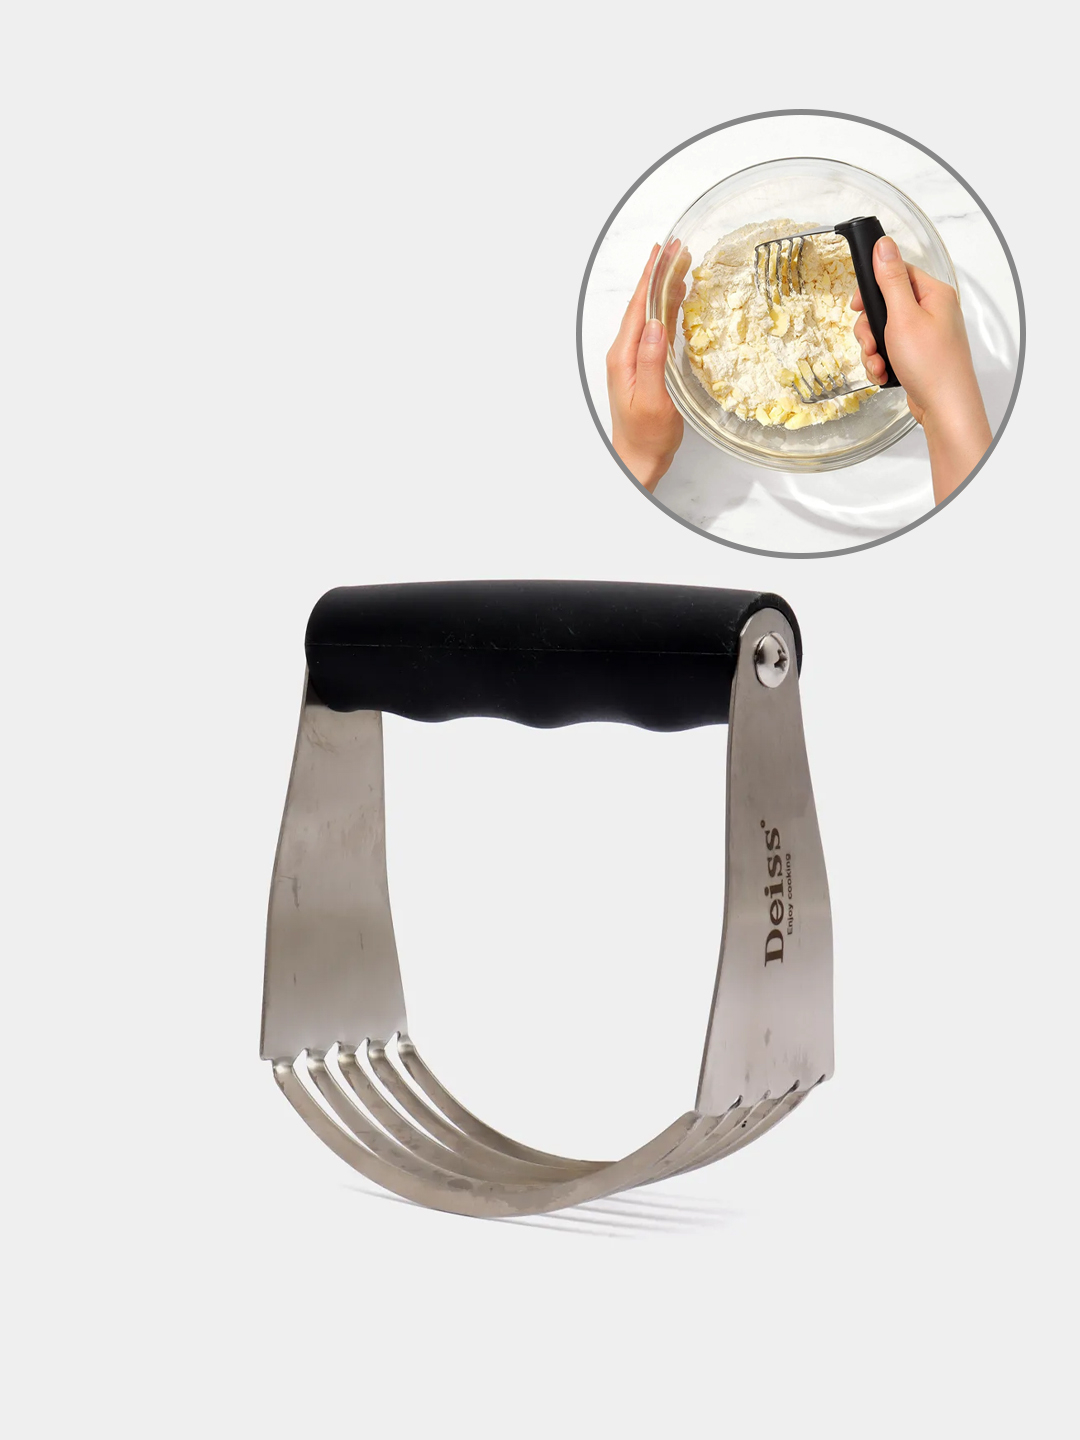 Deiss Pro Pastry Cutter - Stainless Steel Pastry Blender & Dough Cutter  with Non-Slip Handle